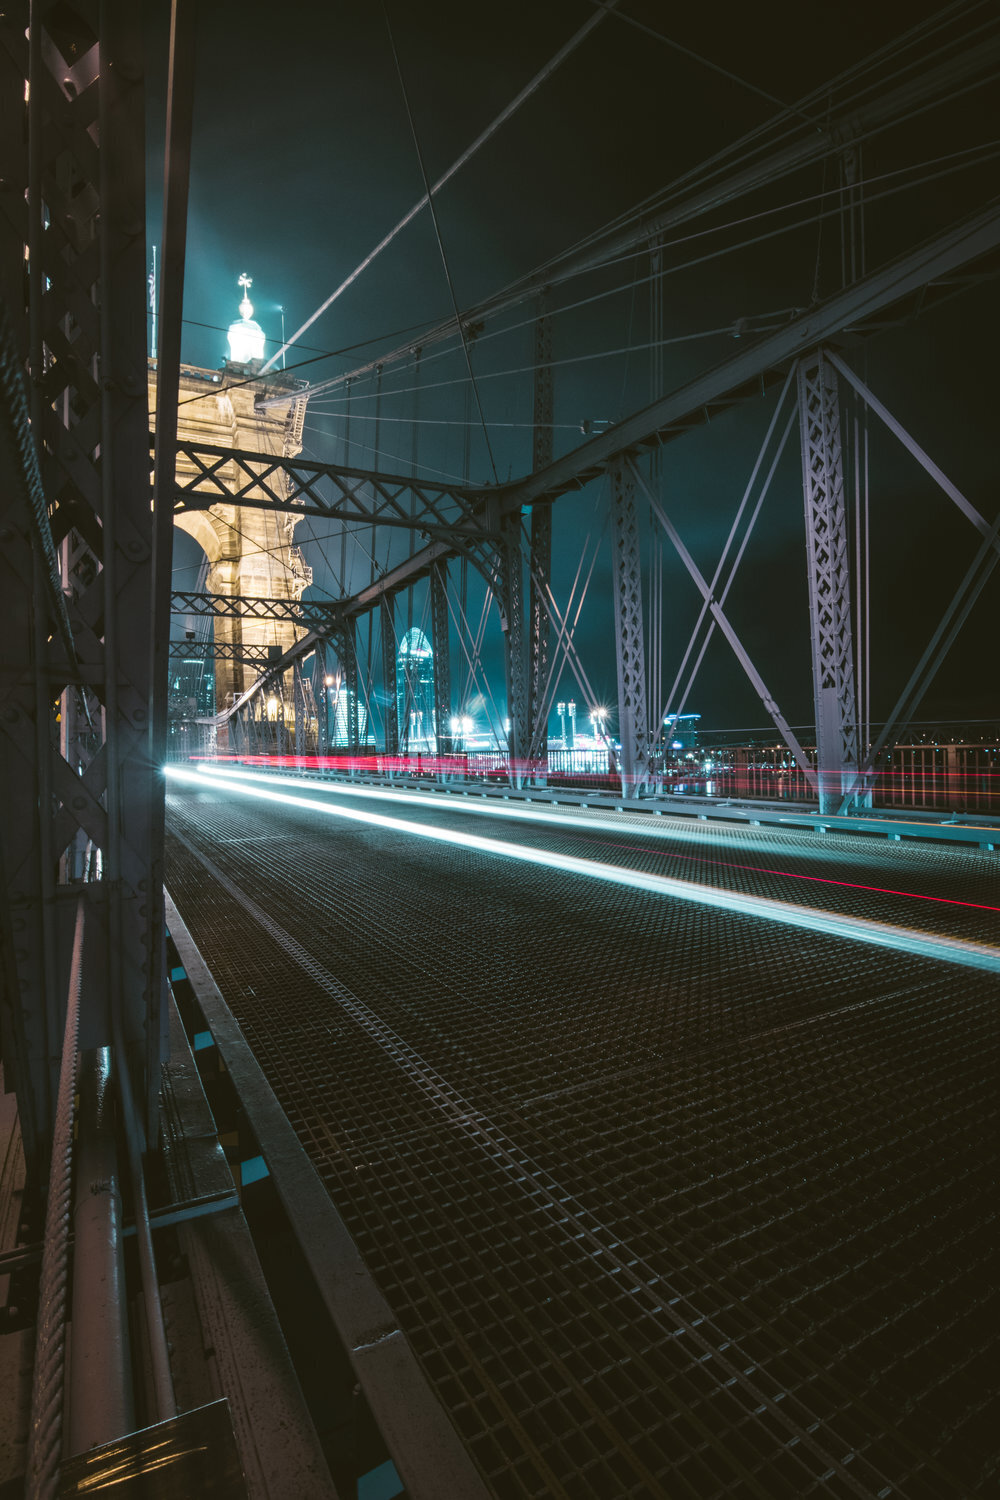 Long exposure photo of the John A Roebling suspension bridge during evening traffic. Located in Cincinnati, Ohio. Photo taken by Aaron Aldhizer